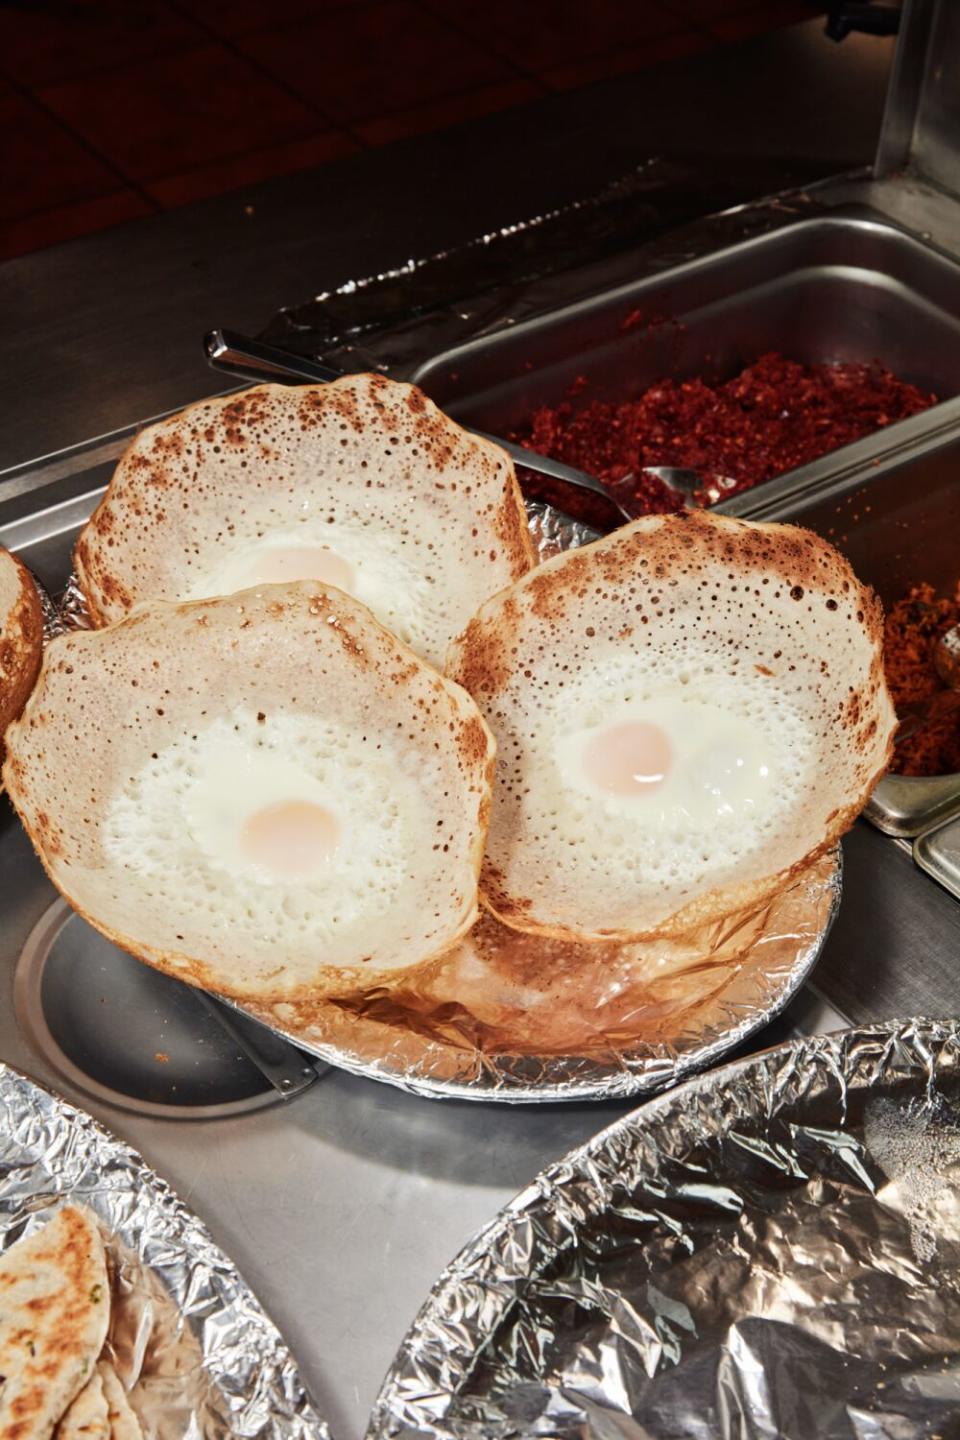 Egg Hoppers available for buffet diners.